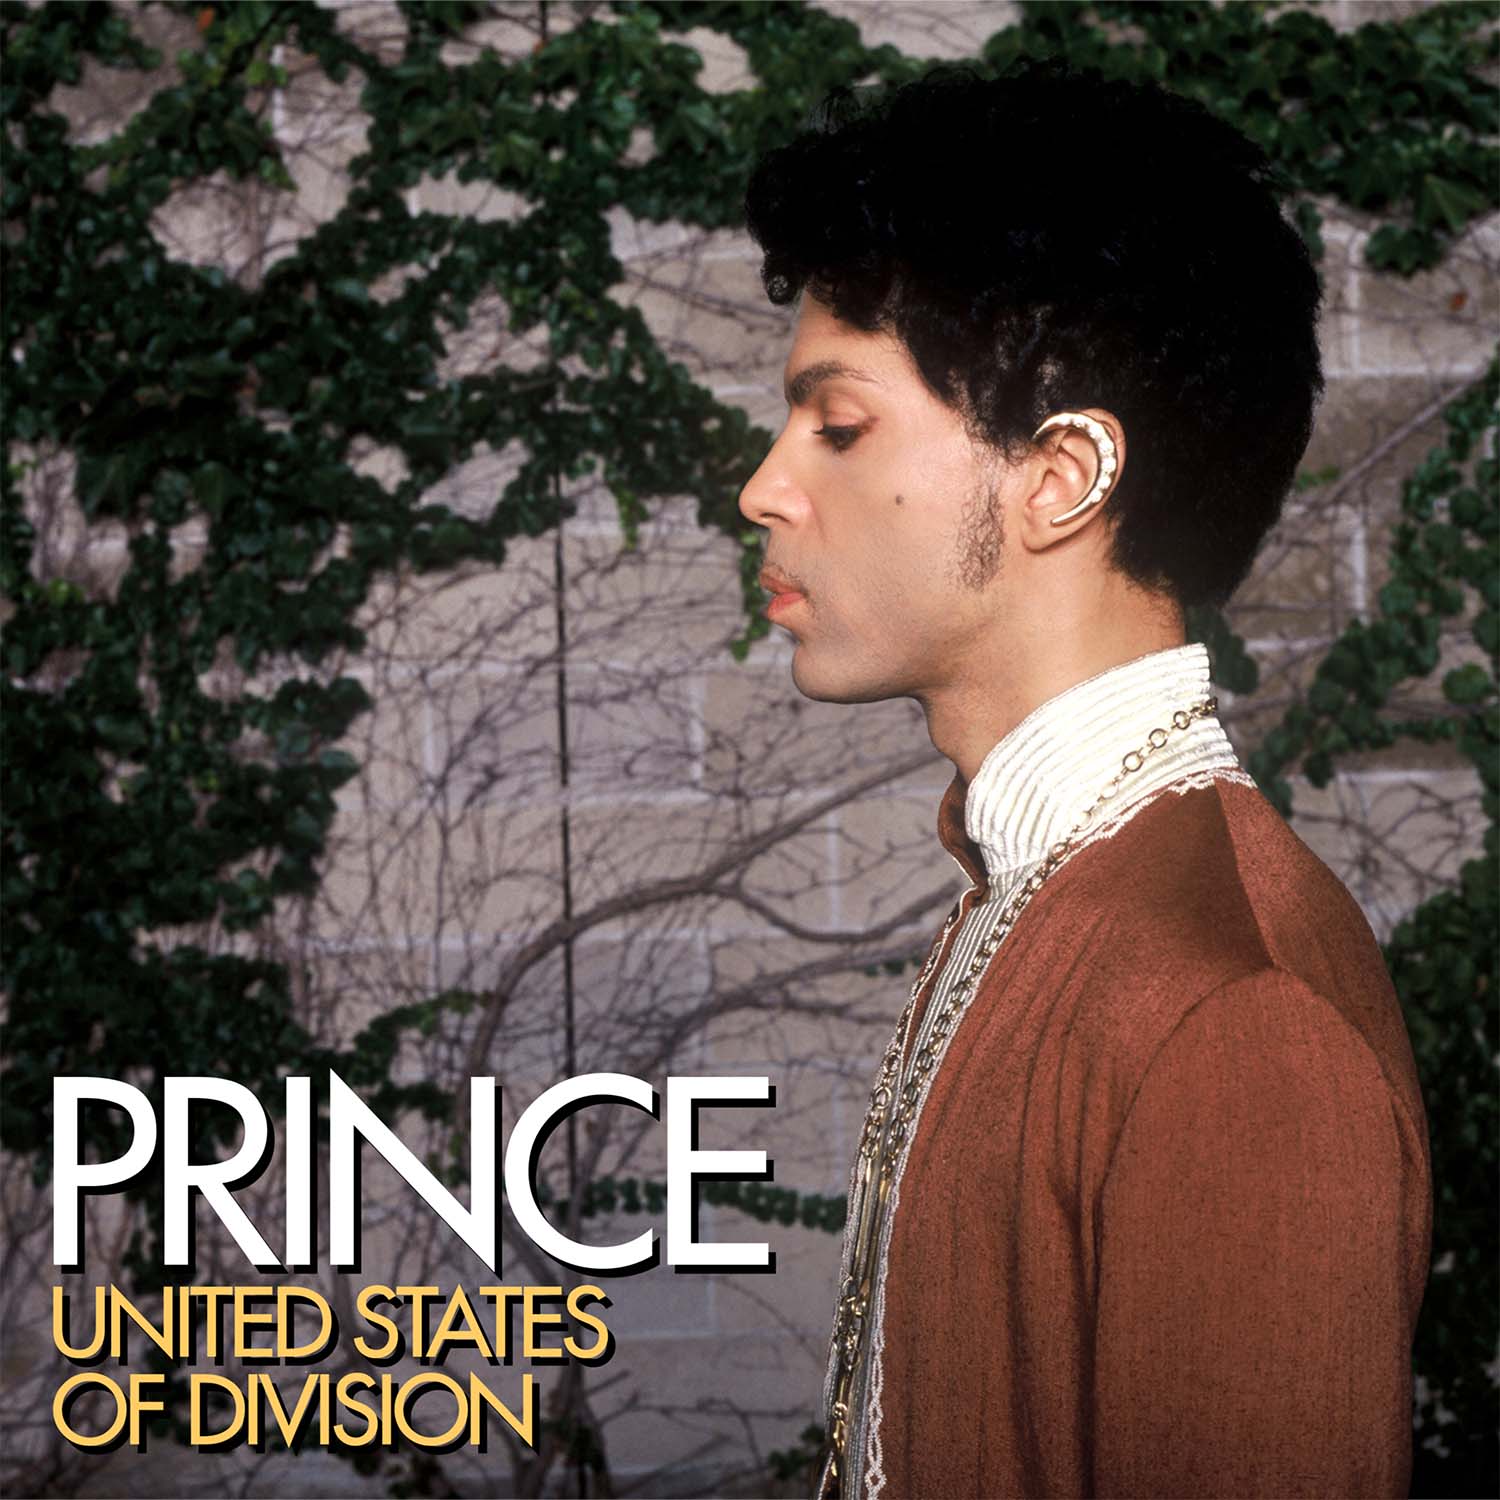 Prince ‘United States Of Division’ Released To Celebrate 20th Anniversary Of 2004 Album ‘Musicology’